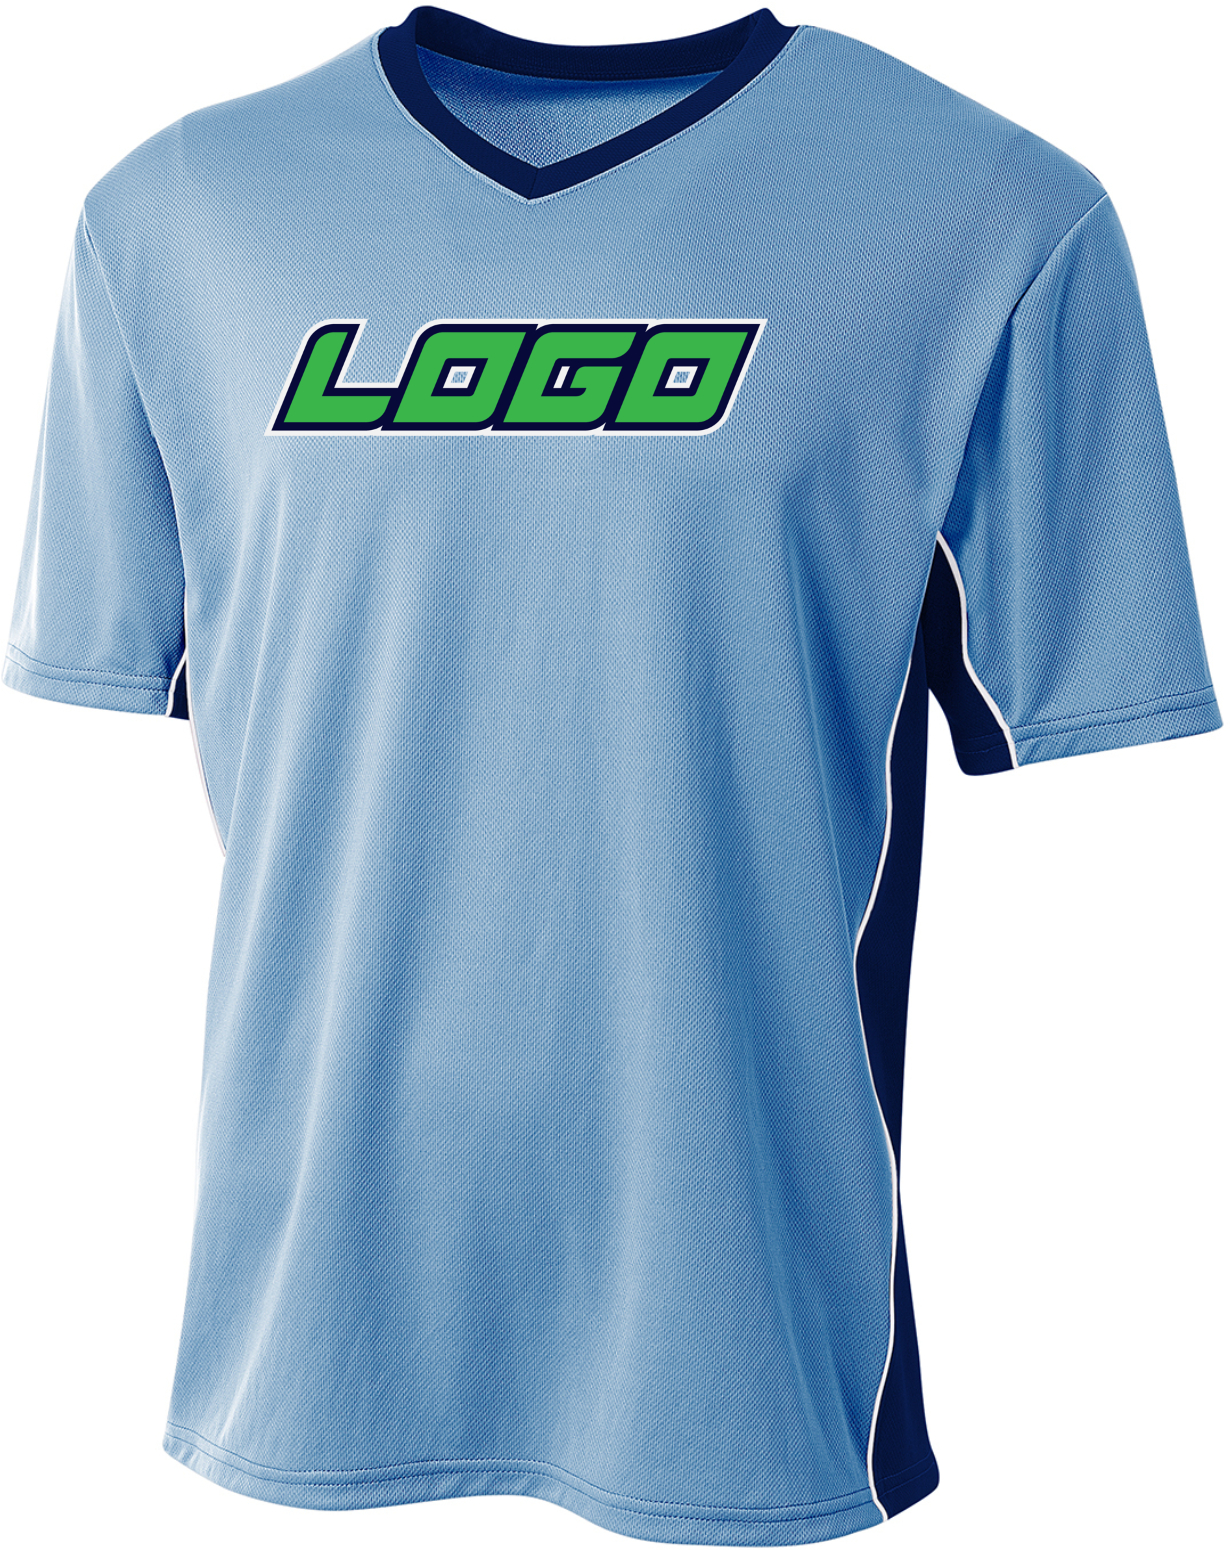 Performance Youth Soccer Jersey